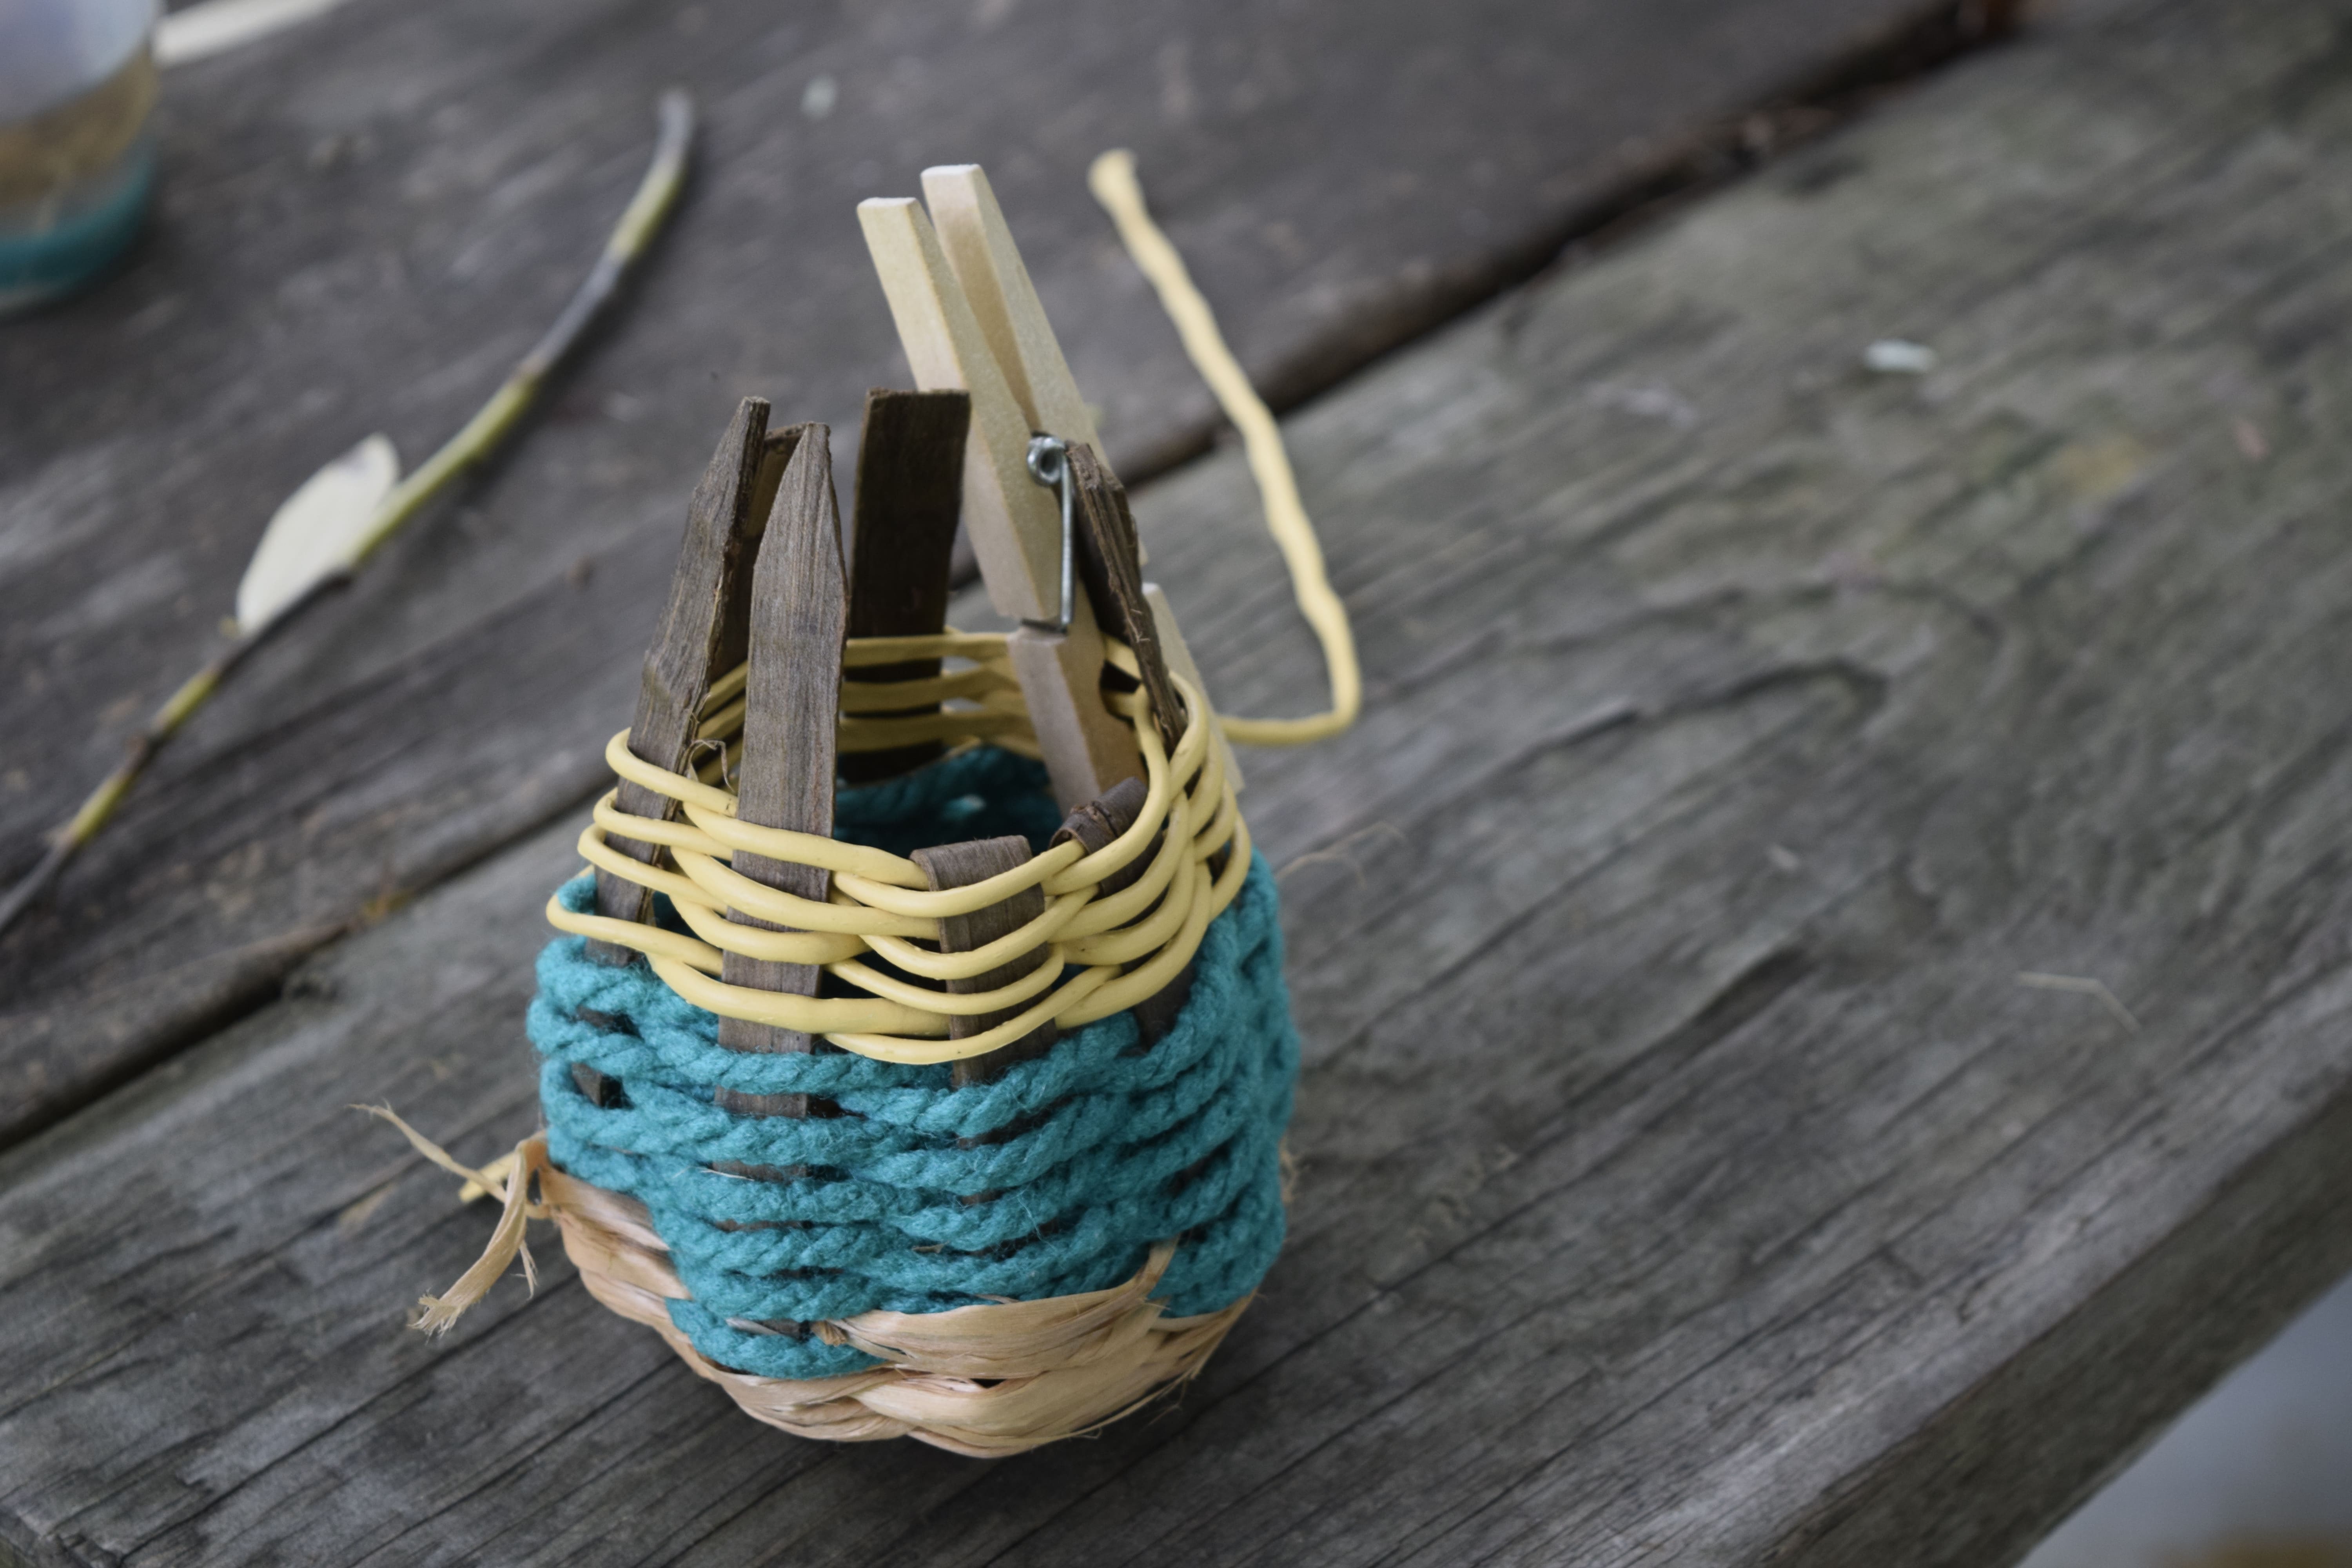 a twined basket using black walnut, basswood, and alternative materials